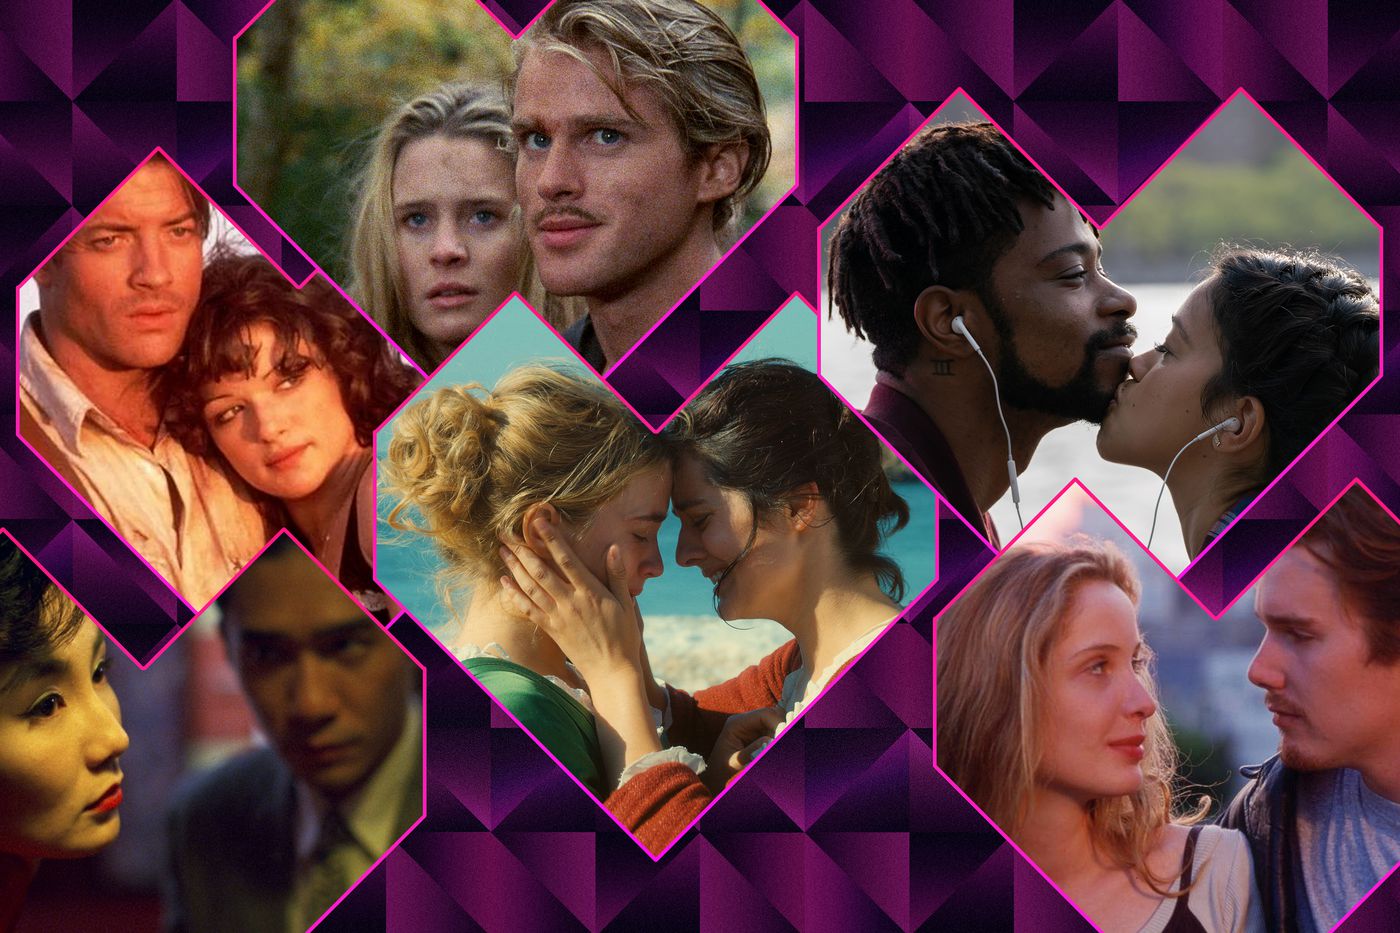 20 best romance movies to watch on Netflix, Hulu, HBO and more ...